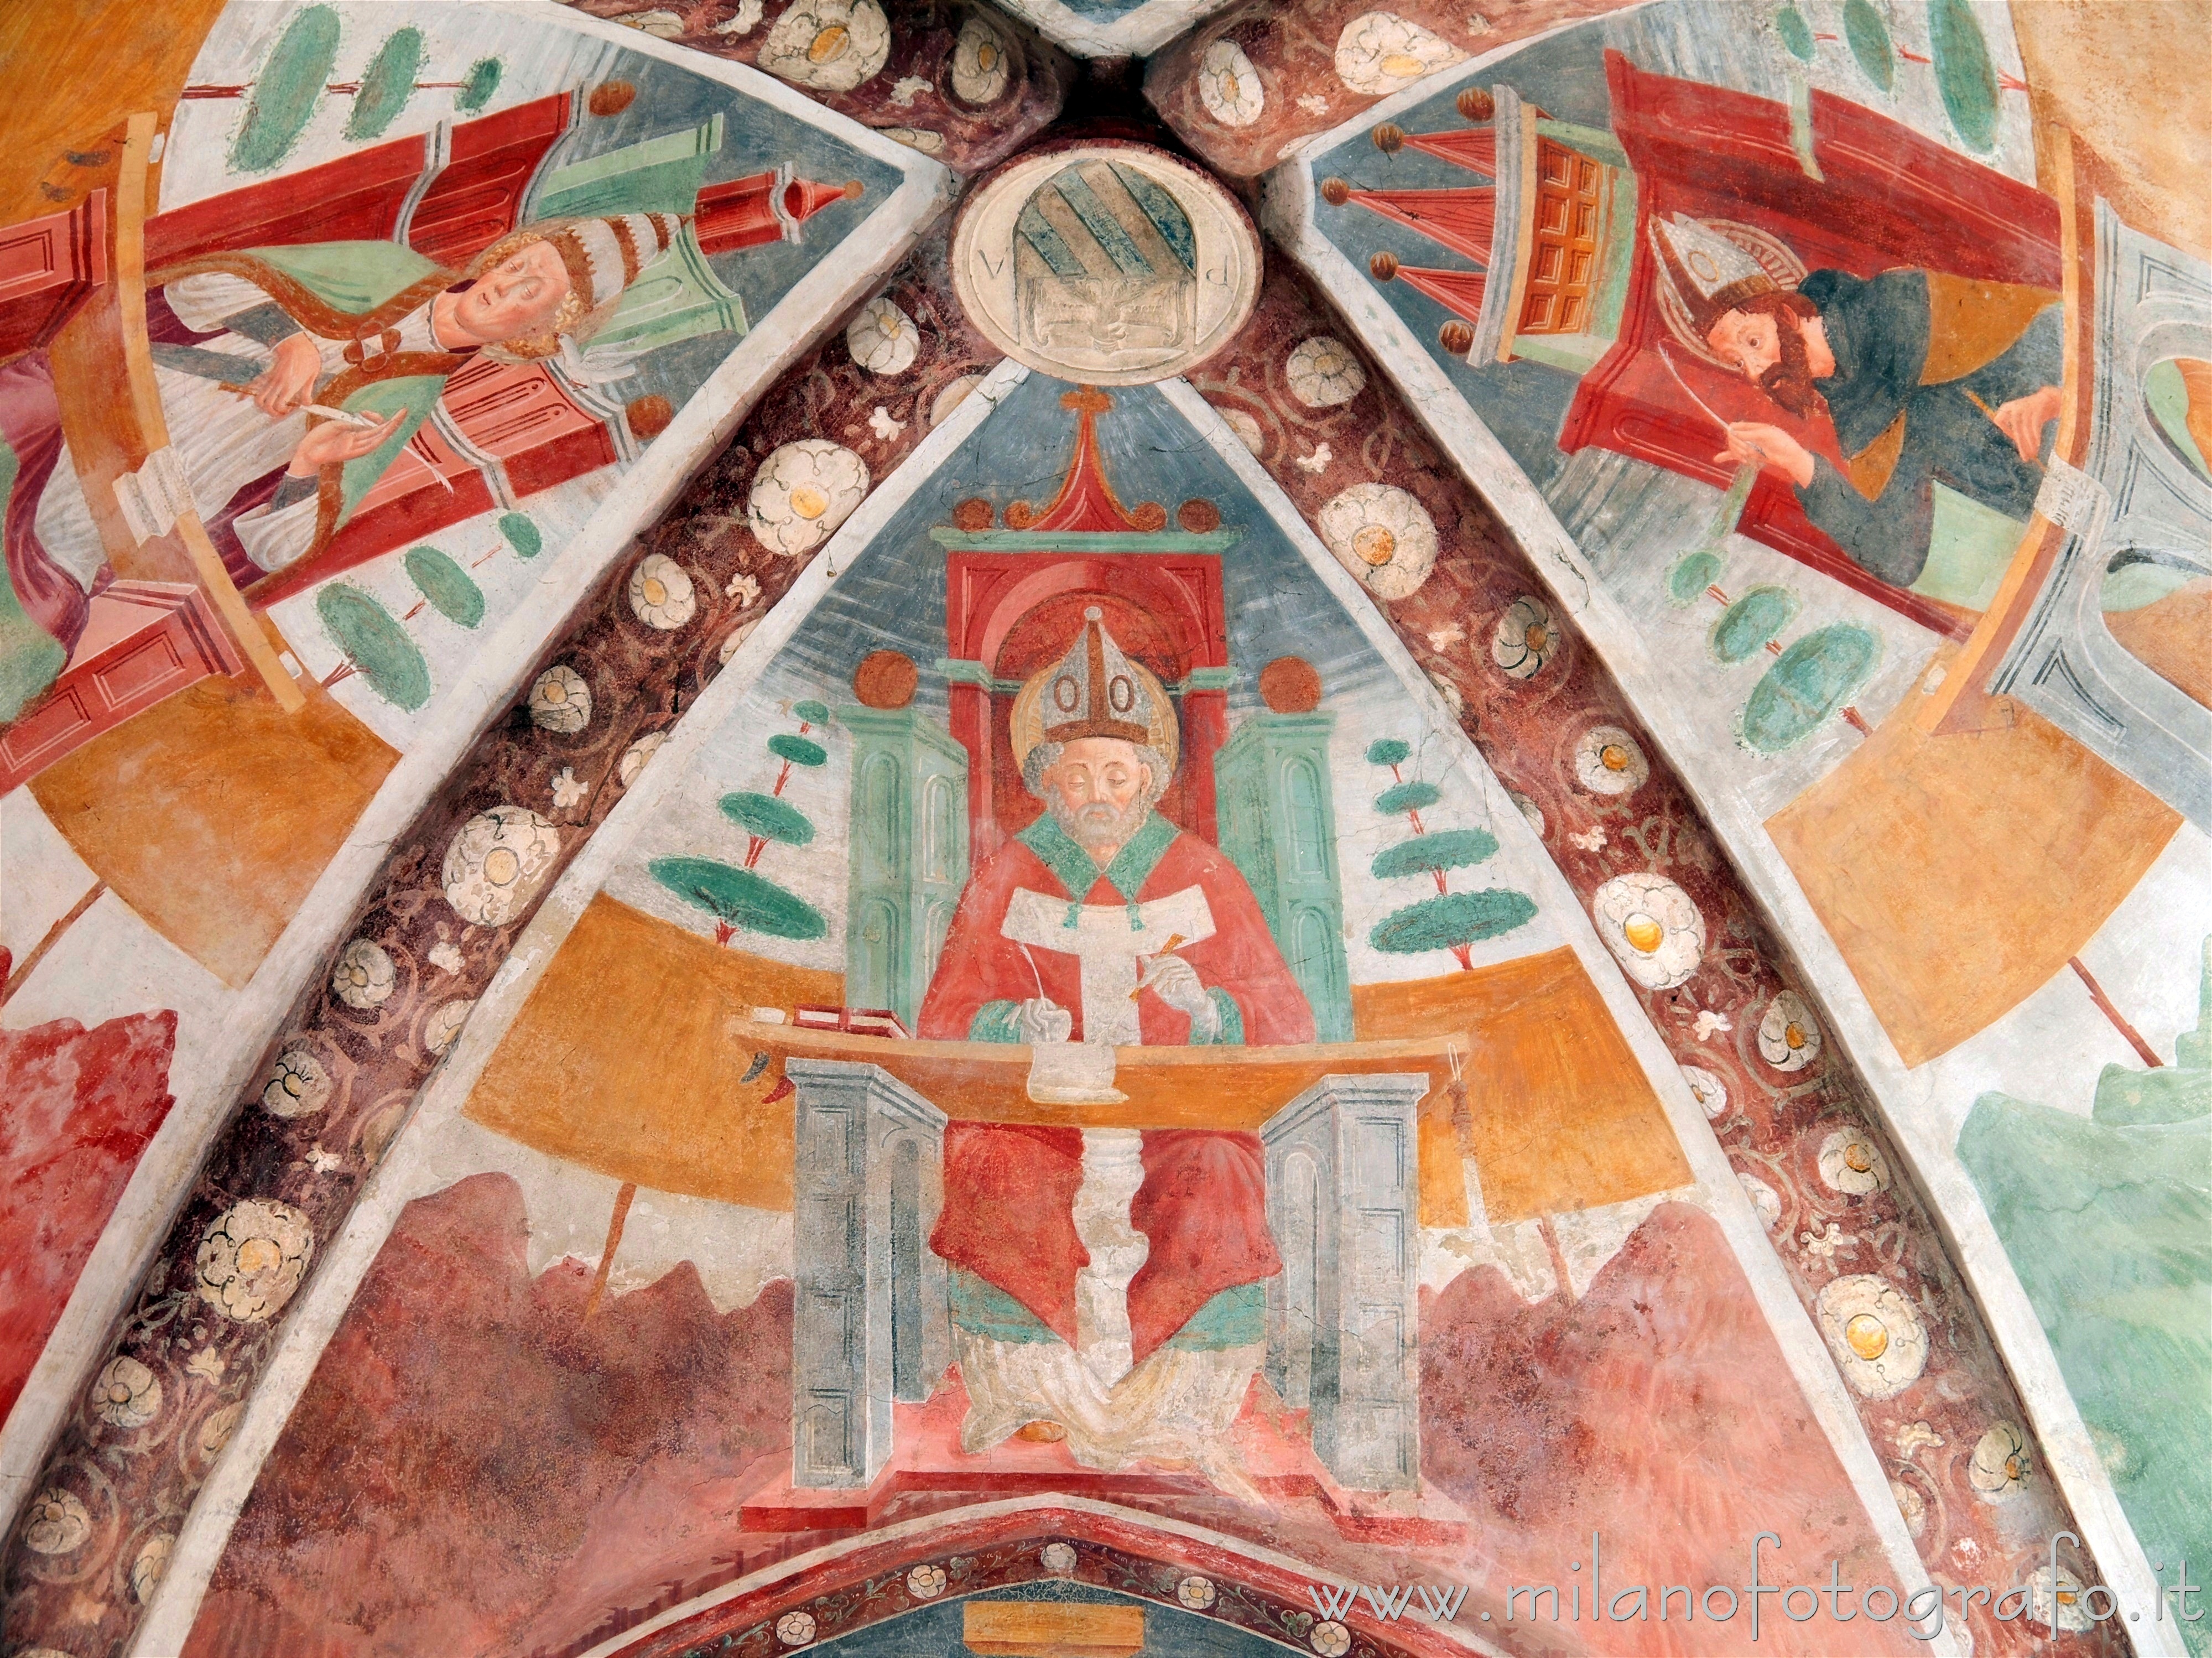 Settimo Milanese (Milan, Italy): Frescoes of doctors of the Church on the vault of the aps of the Oratory of San Giovanni Battista - Settimo Milanese (Milan, Italy)